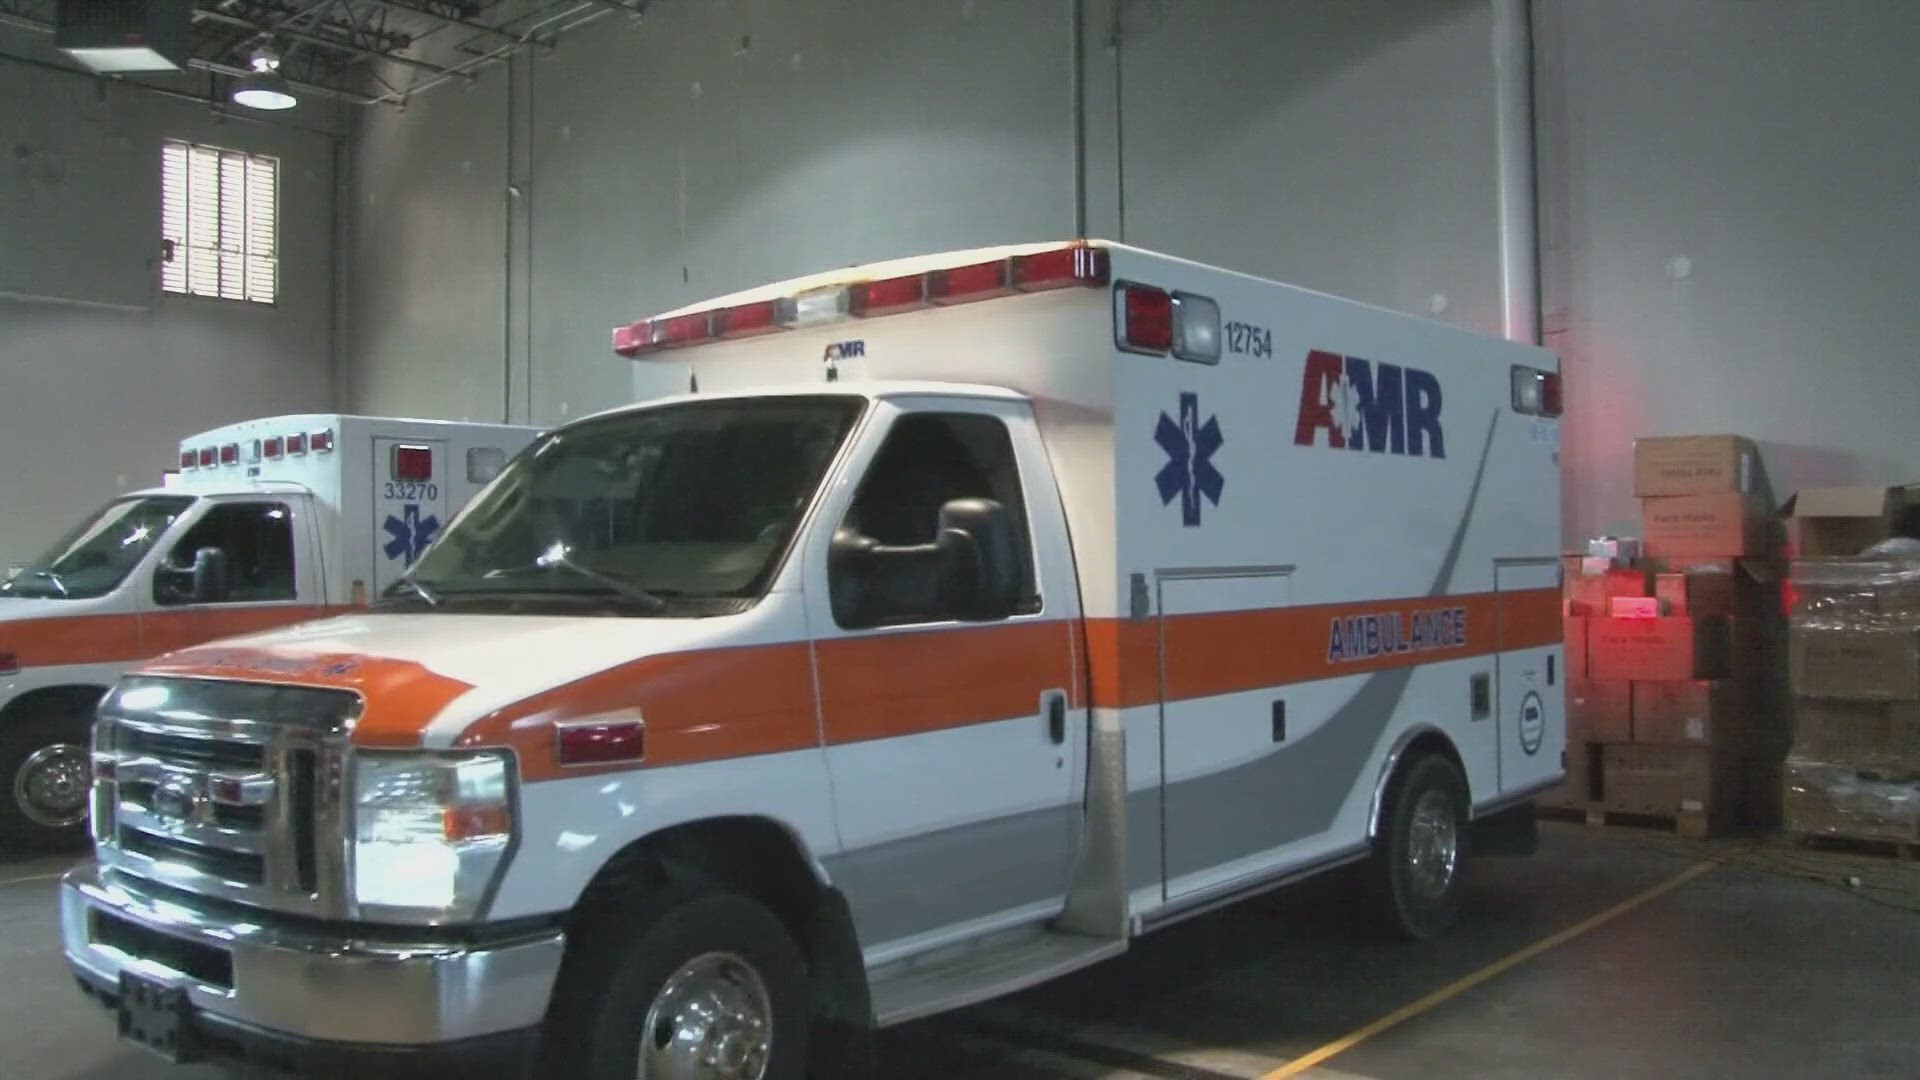 Knox County could get a new Ambulance service. The deadline to submit bids for a new contract was this past Tuesday.